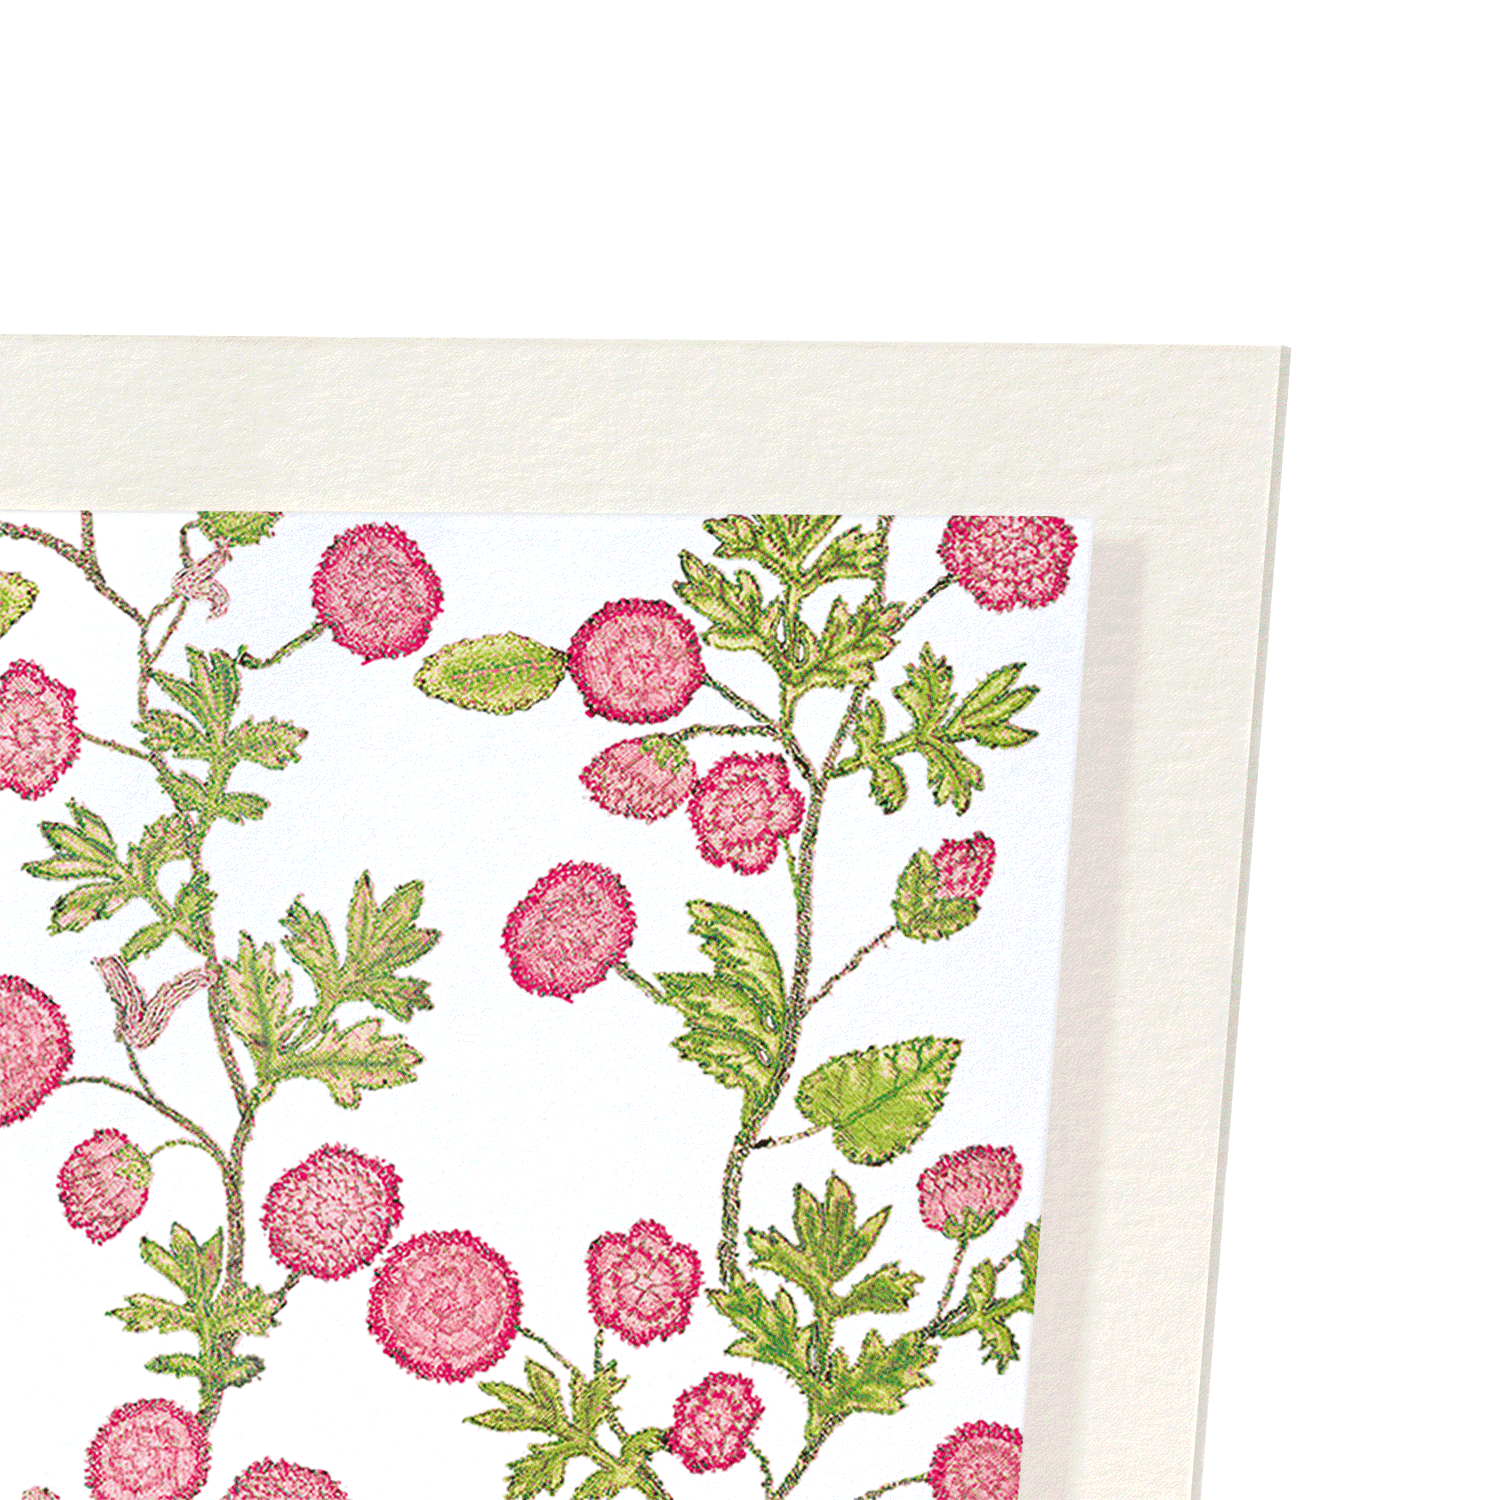 TUDOR EMBROIDERY OF ROSES ON WHITE (16TH C.): Pattern Art Print